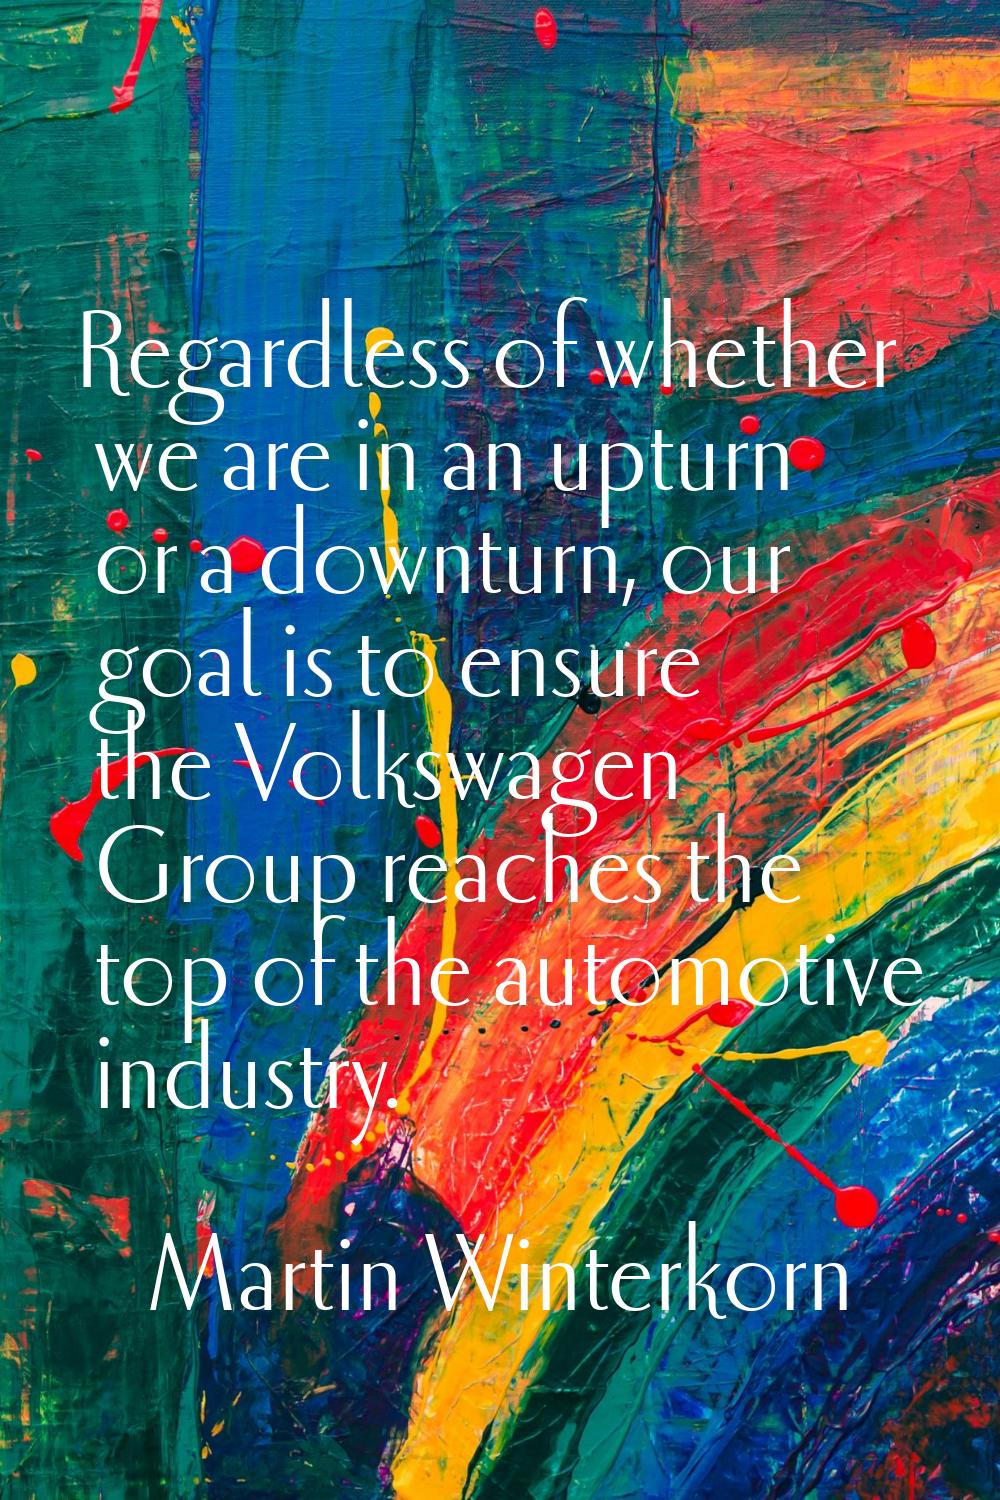 Regardless of whether we are in an upturn or a downturn, our goal is to ensure the Volkswagen Group